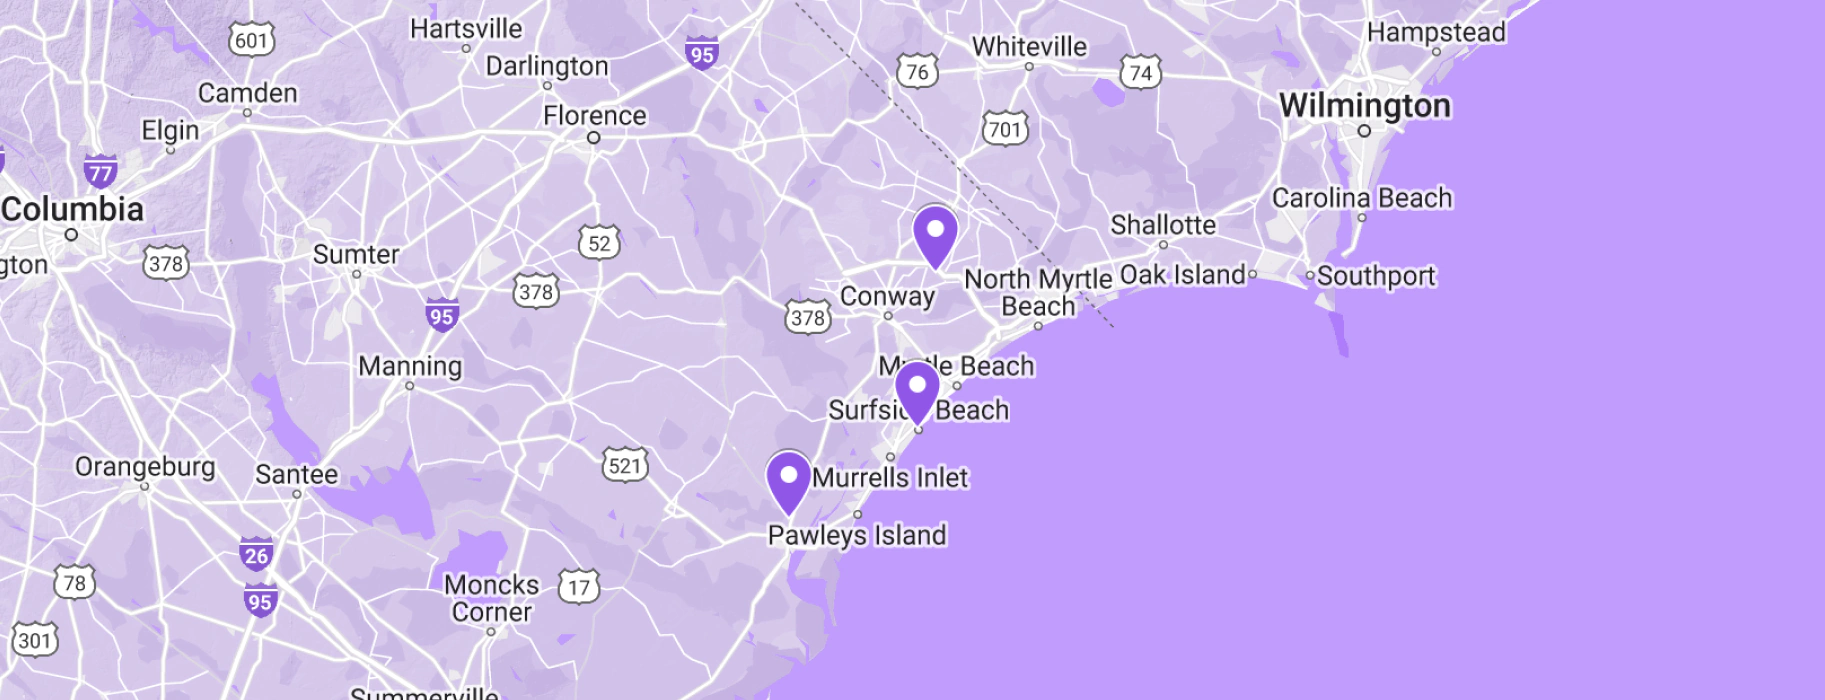 East Coast Cleaning and Restoration Services, LLC map2